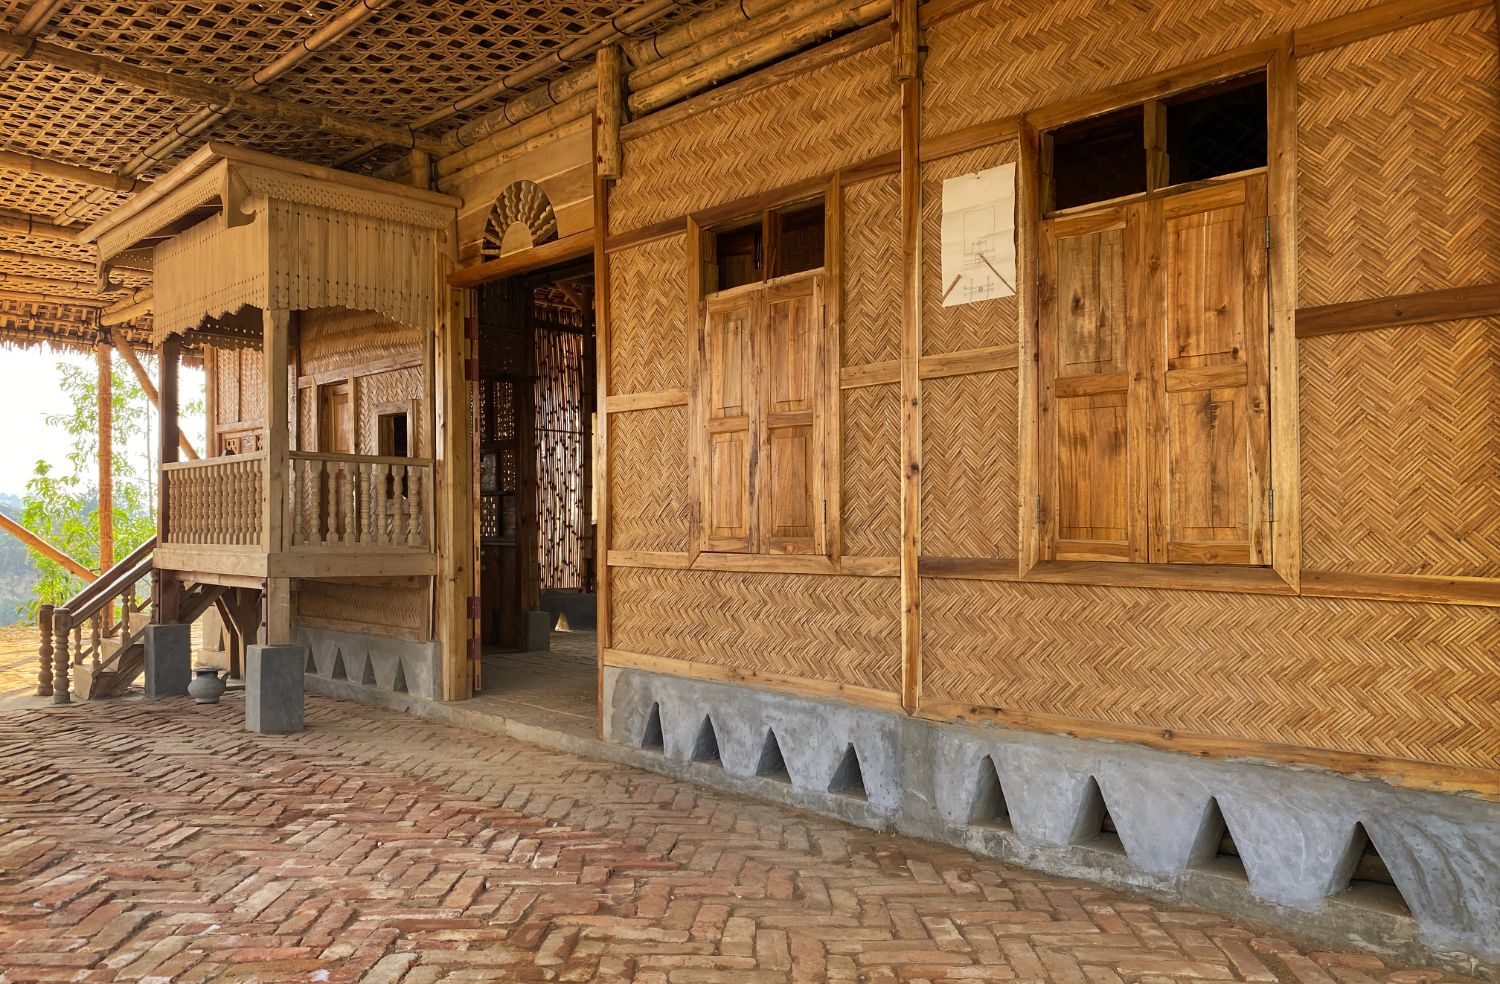 Entry hall of Rohingya Cultural Memory Centre